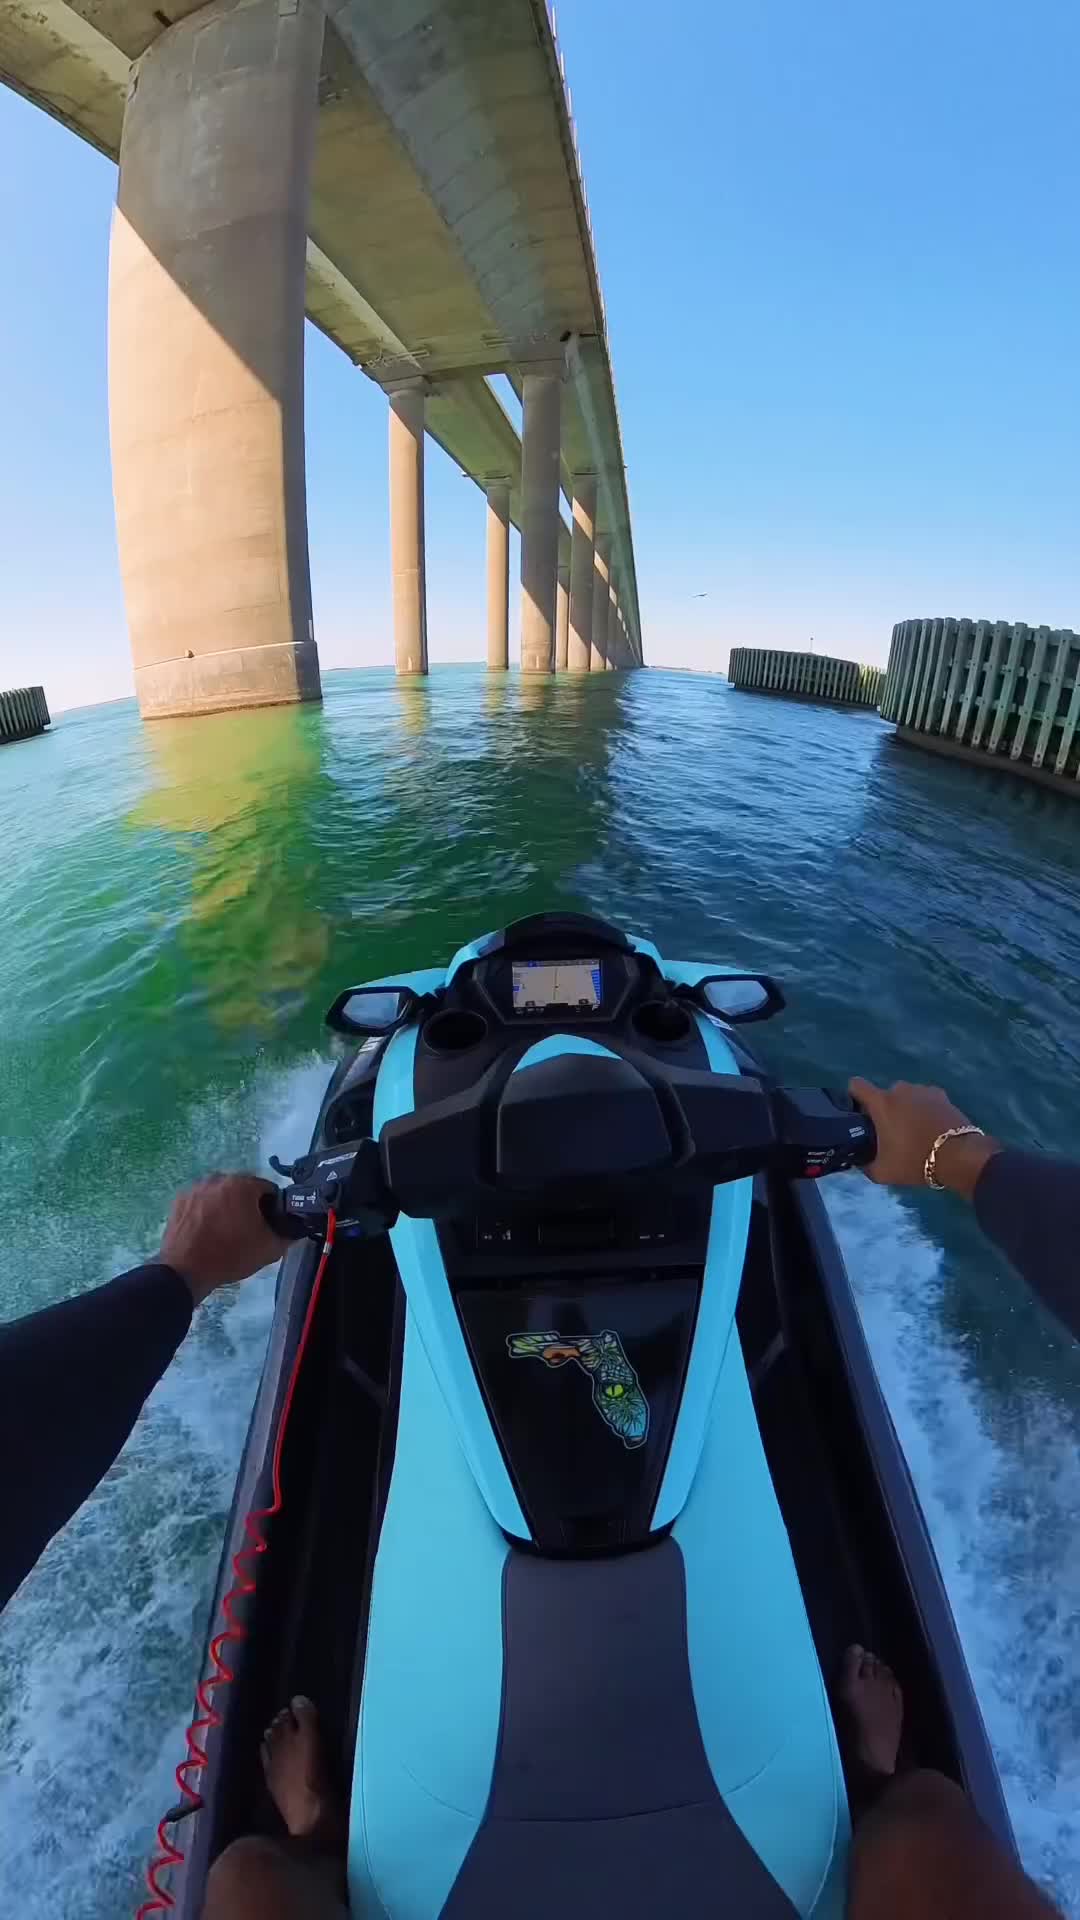 One Day at a Time on a Jet Ski - Skyway Bridge Adventure